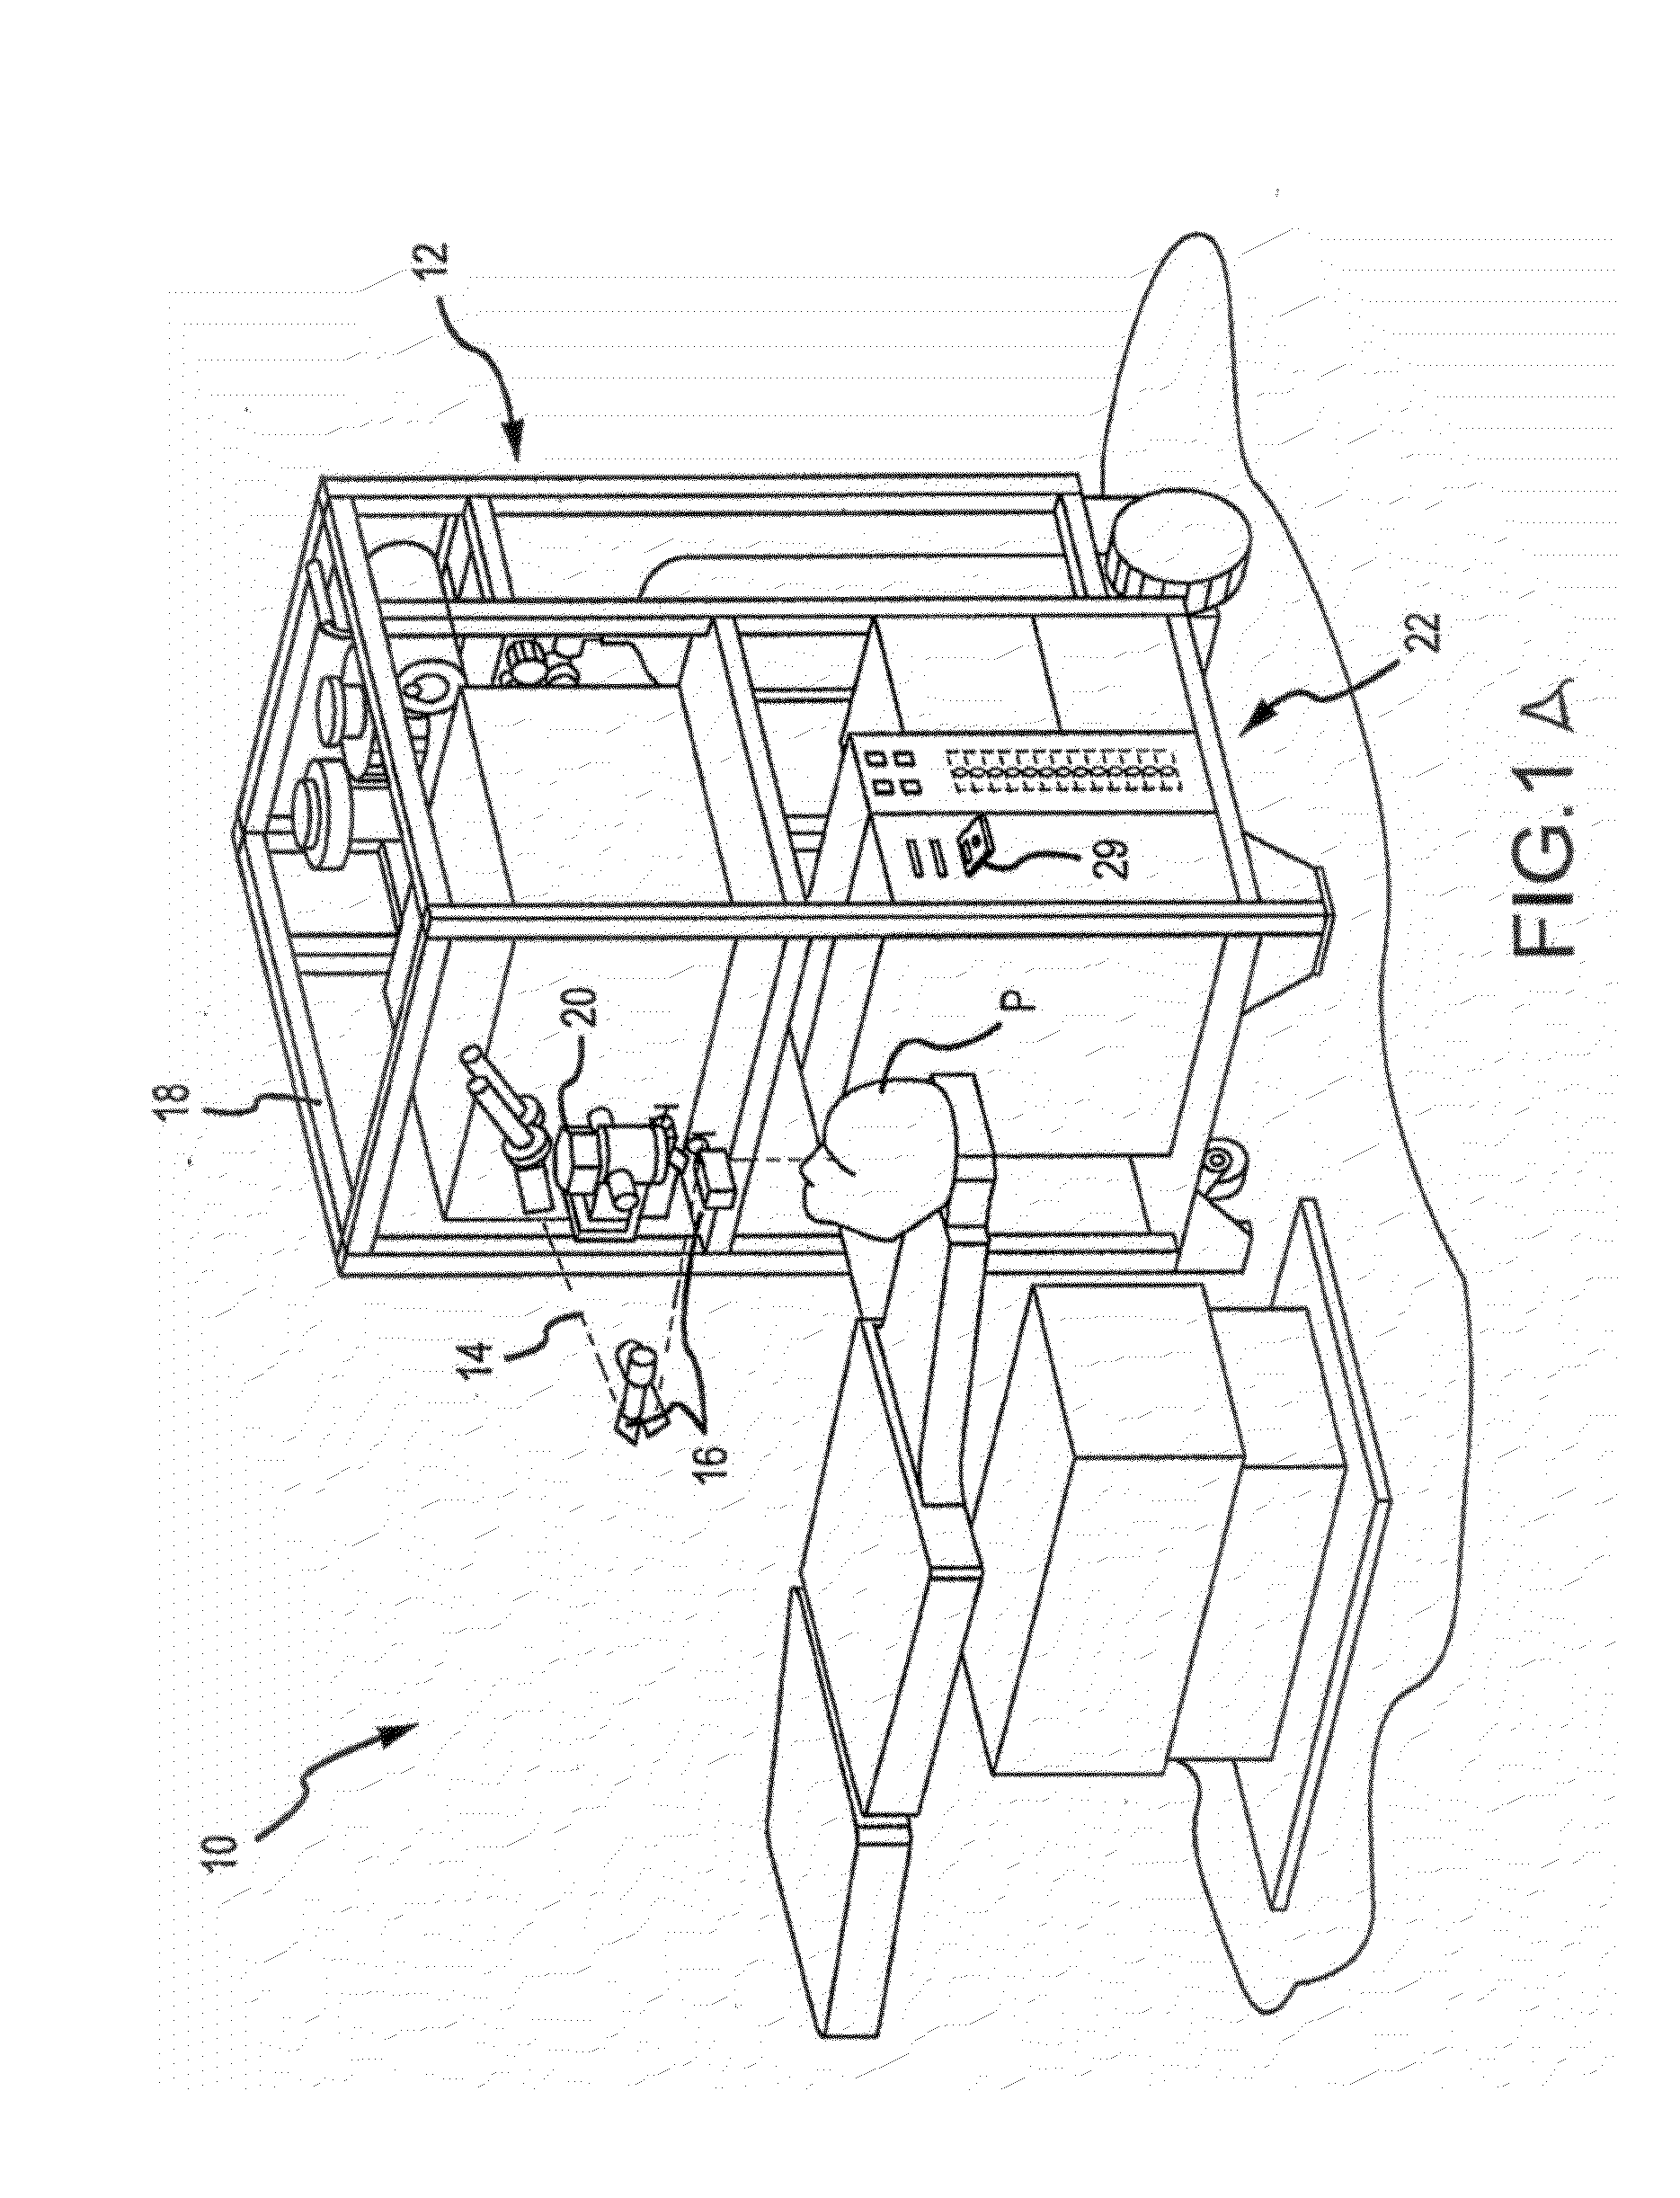 Method and system for eye measurements and cataract surgery planning using vector function derived from prior surgeries